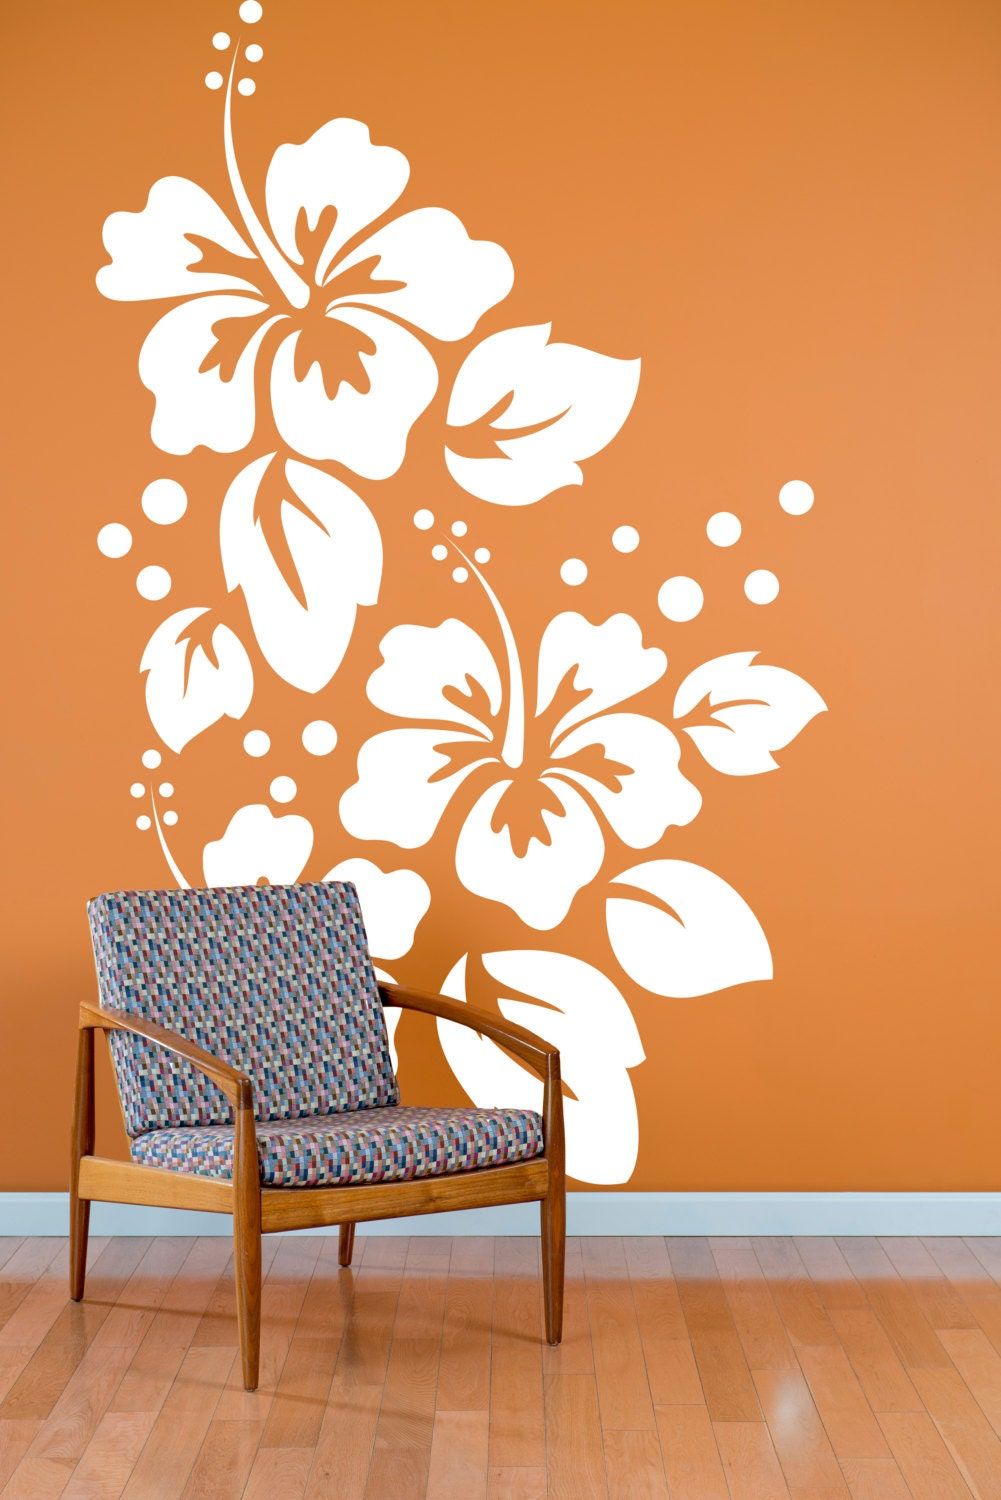 Large Hibiscus Flowers Pattern Wall Decal Custom Vinyl Art For Best And Newest Stripes Wall Art (View 13 of 20)